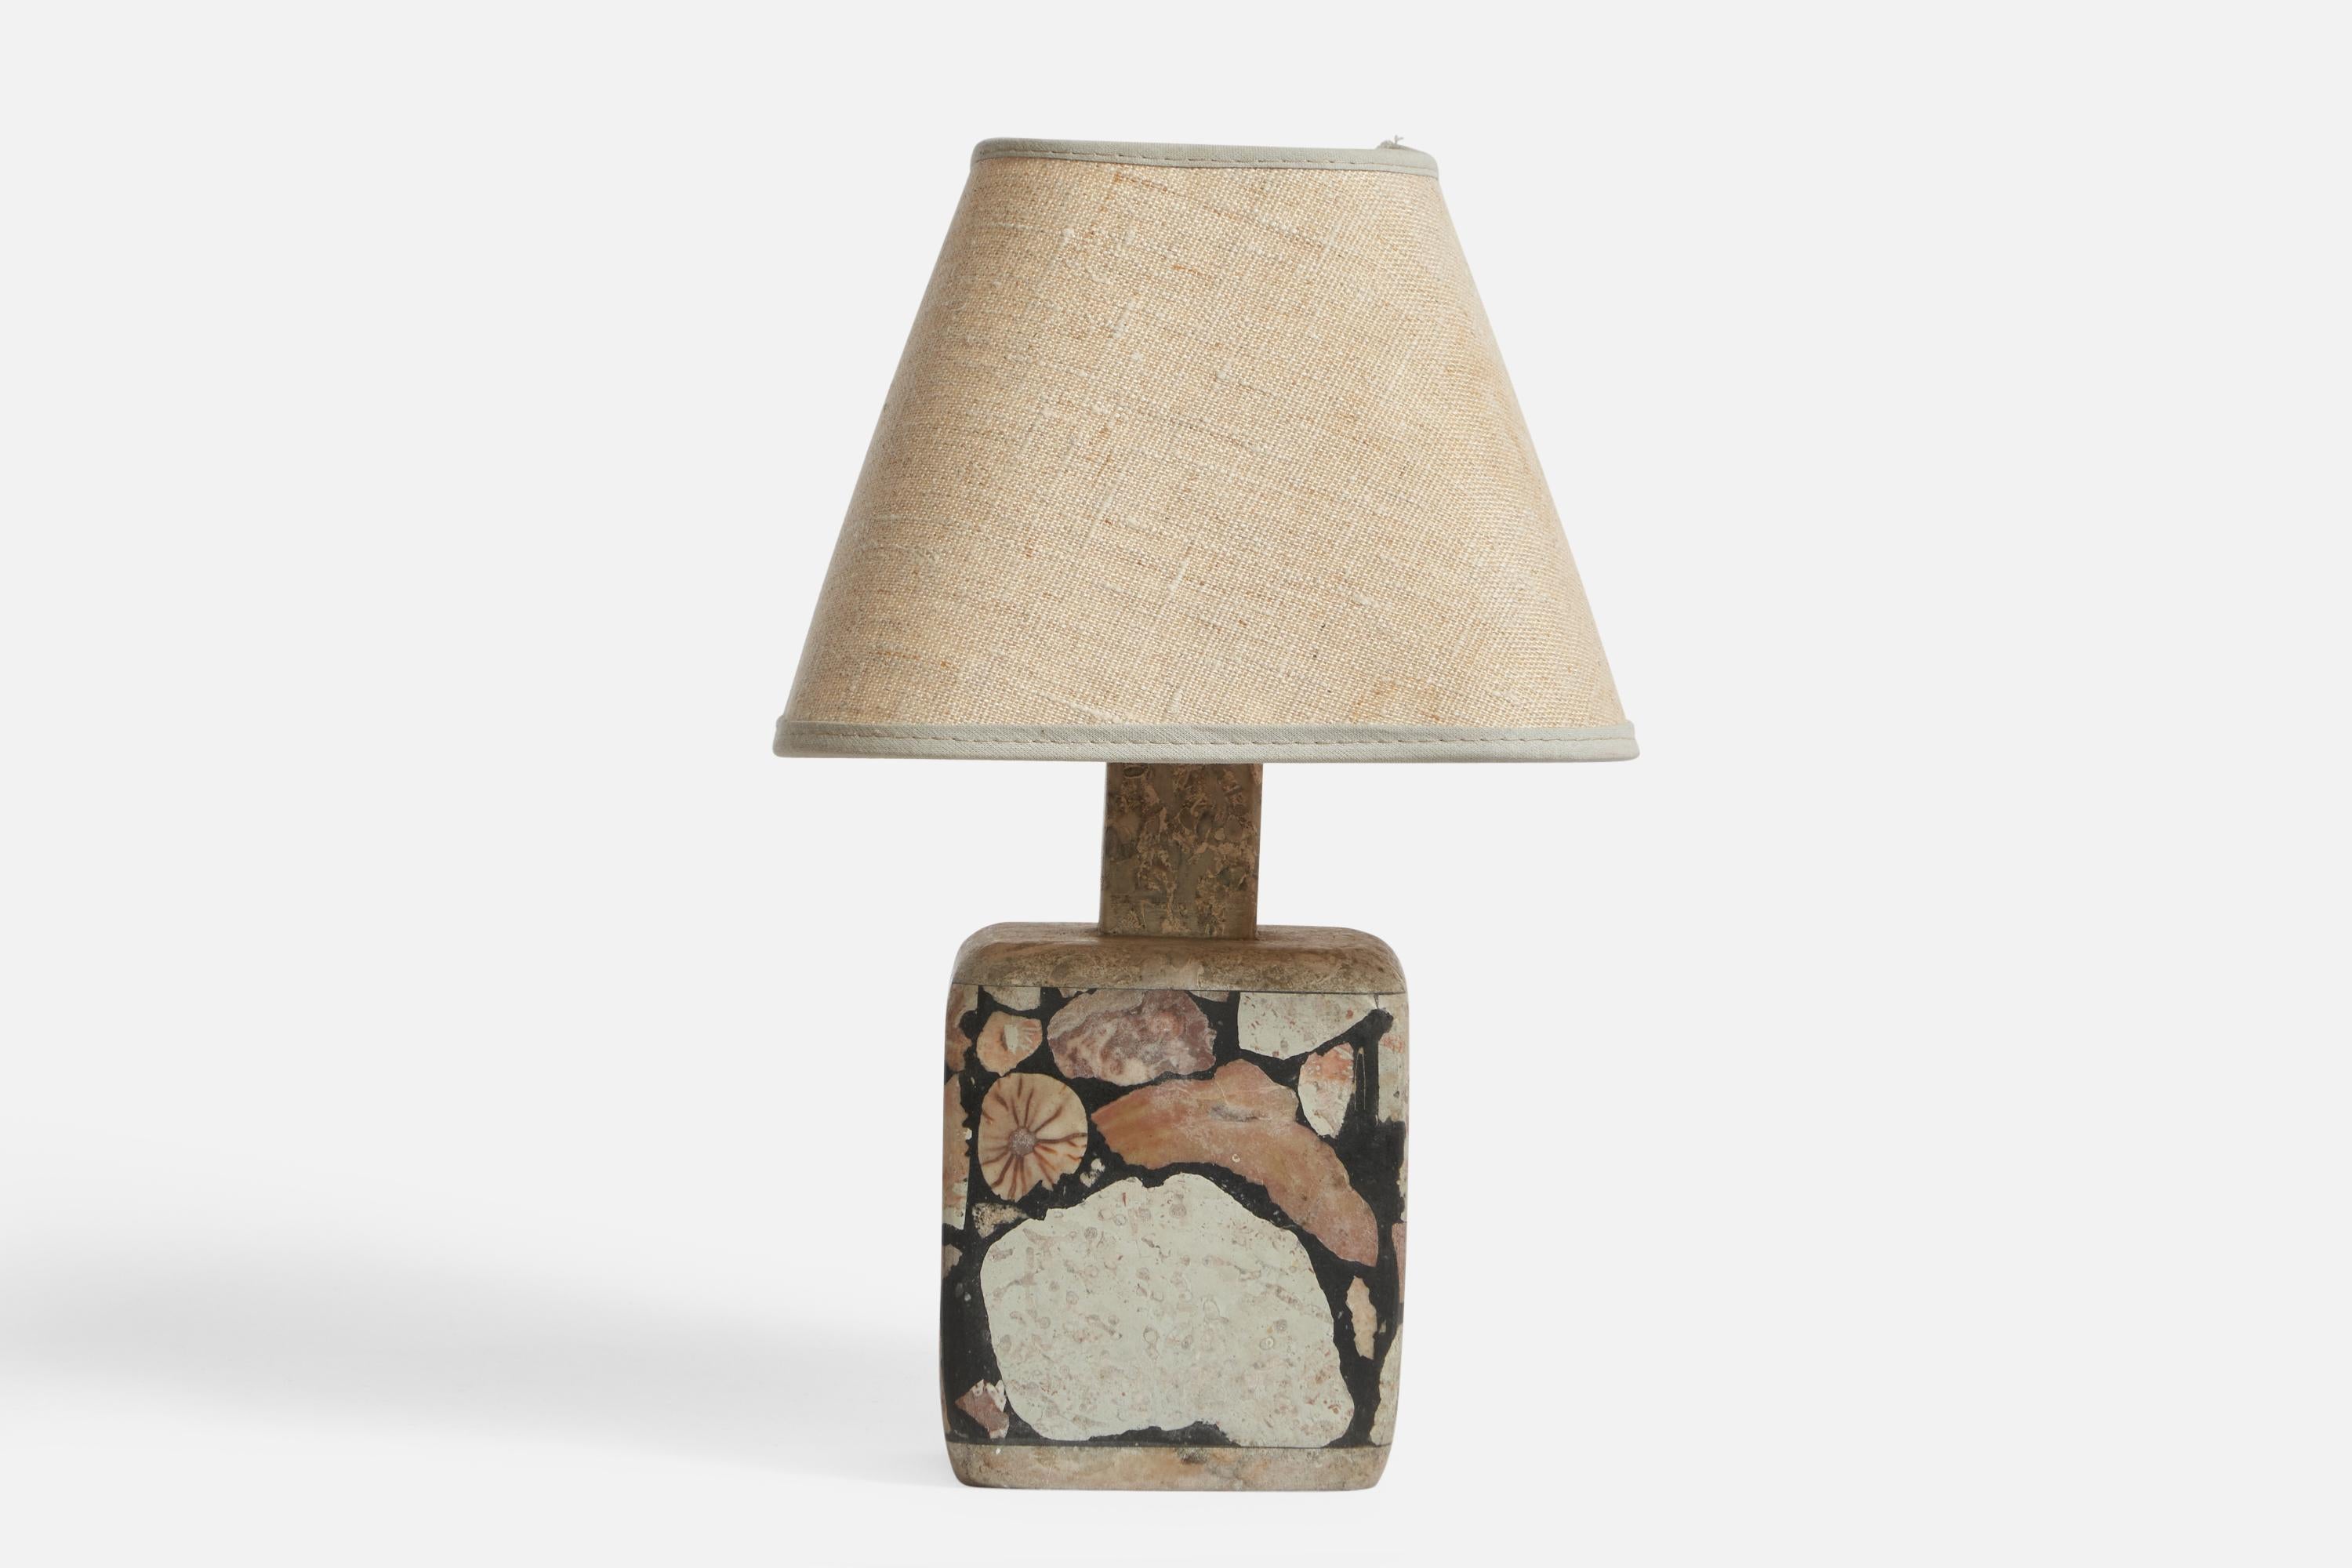 A fossil stone and fabric table lamp designed and produced in Gotland, Sweden, 1970s.

Overall Dimensions (inches): 11.35” H x 7” W x 7” D
Stated dimensions include shade.
Bulb Specifications: E-26 Bulb
Number of Sockets: 1
All lighting will be